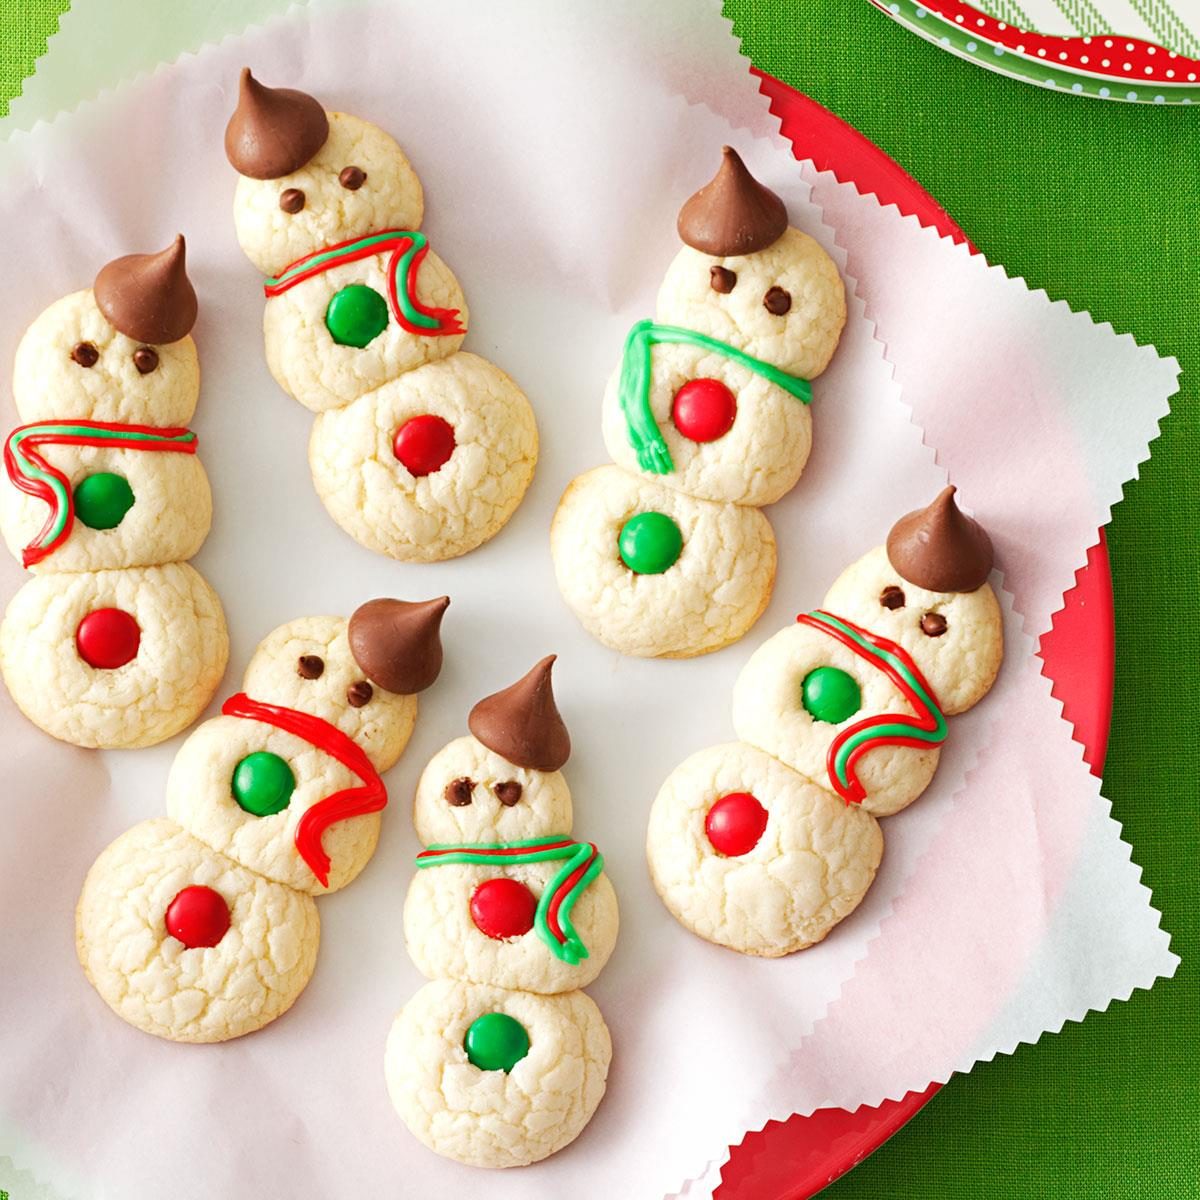 Snowman Cookies Recipe: How to Make It